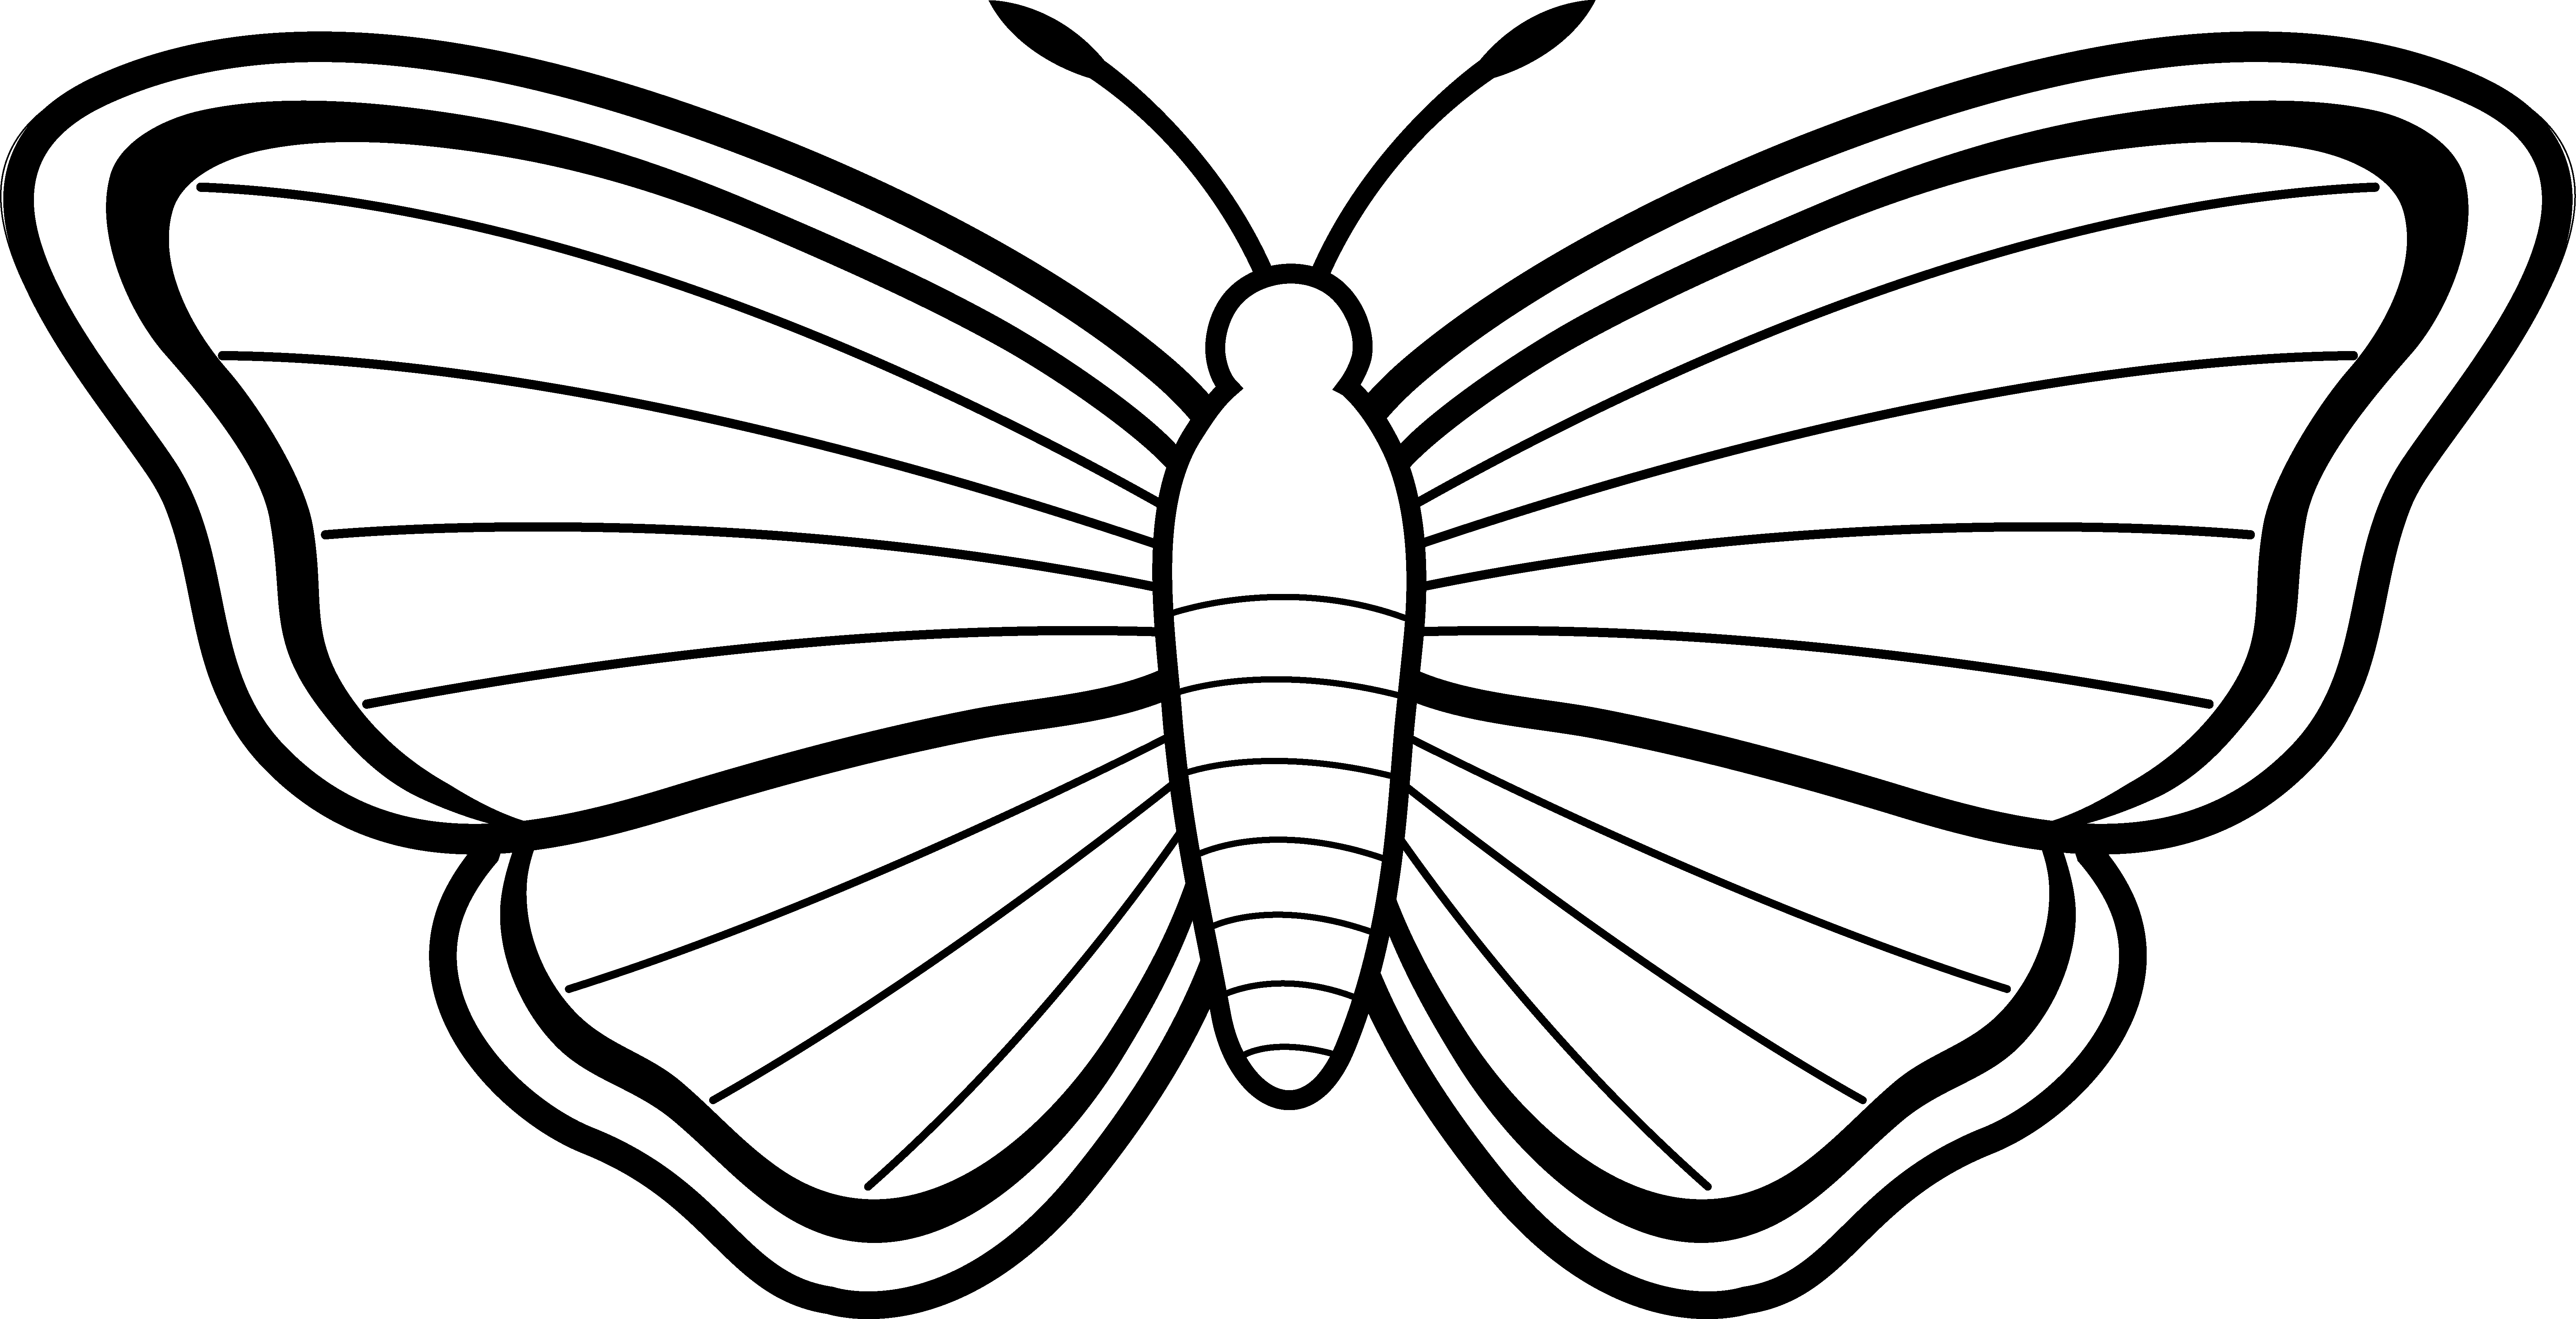 Butterfly Images Black And White | Free Download Clip Art | Free ...